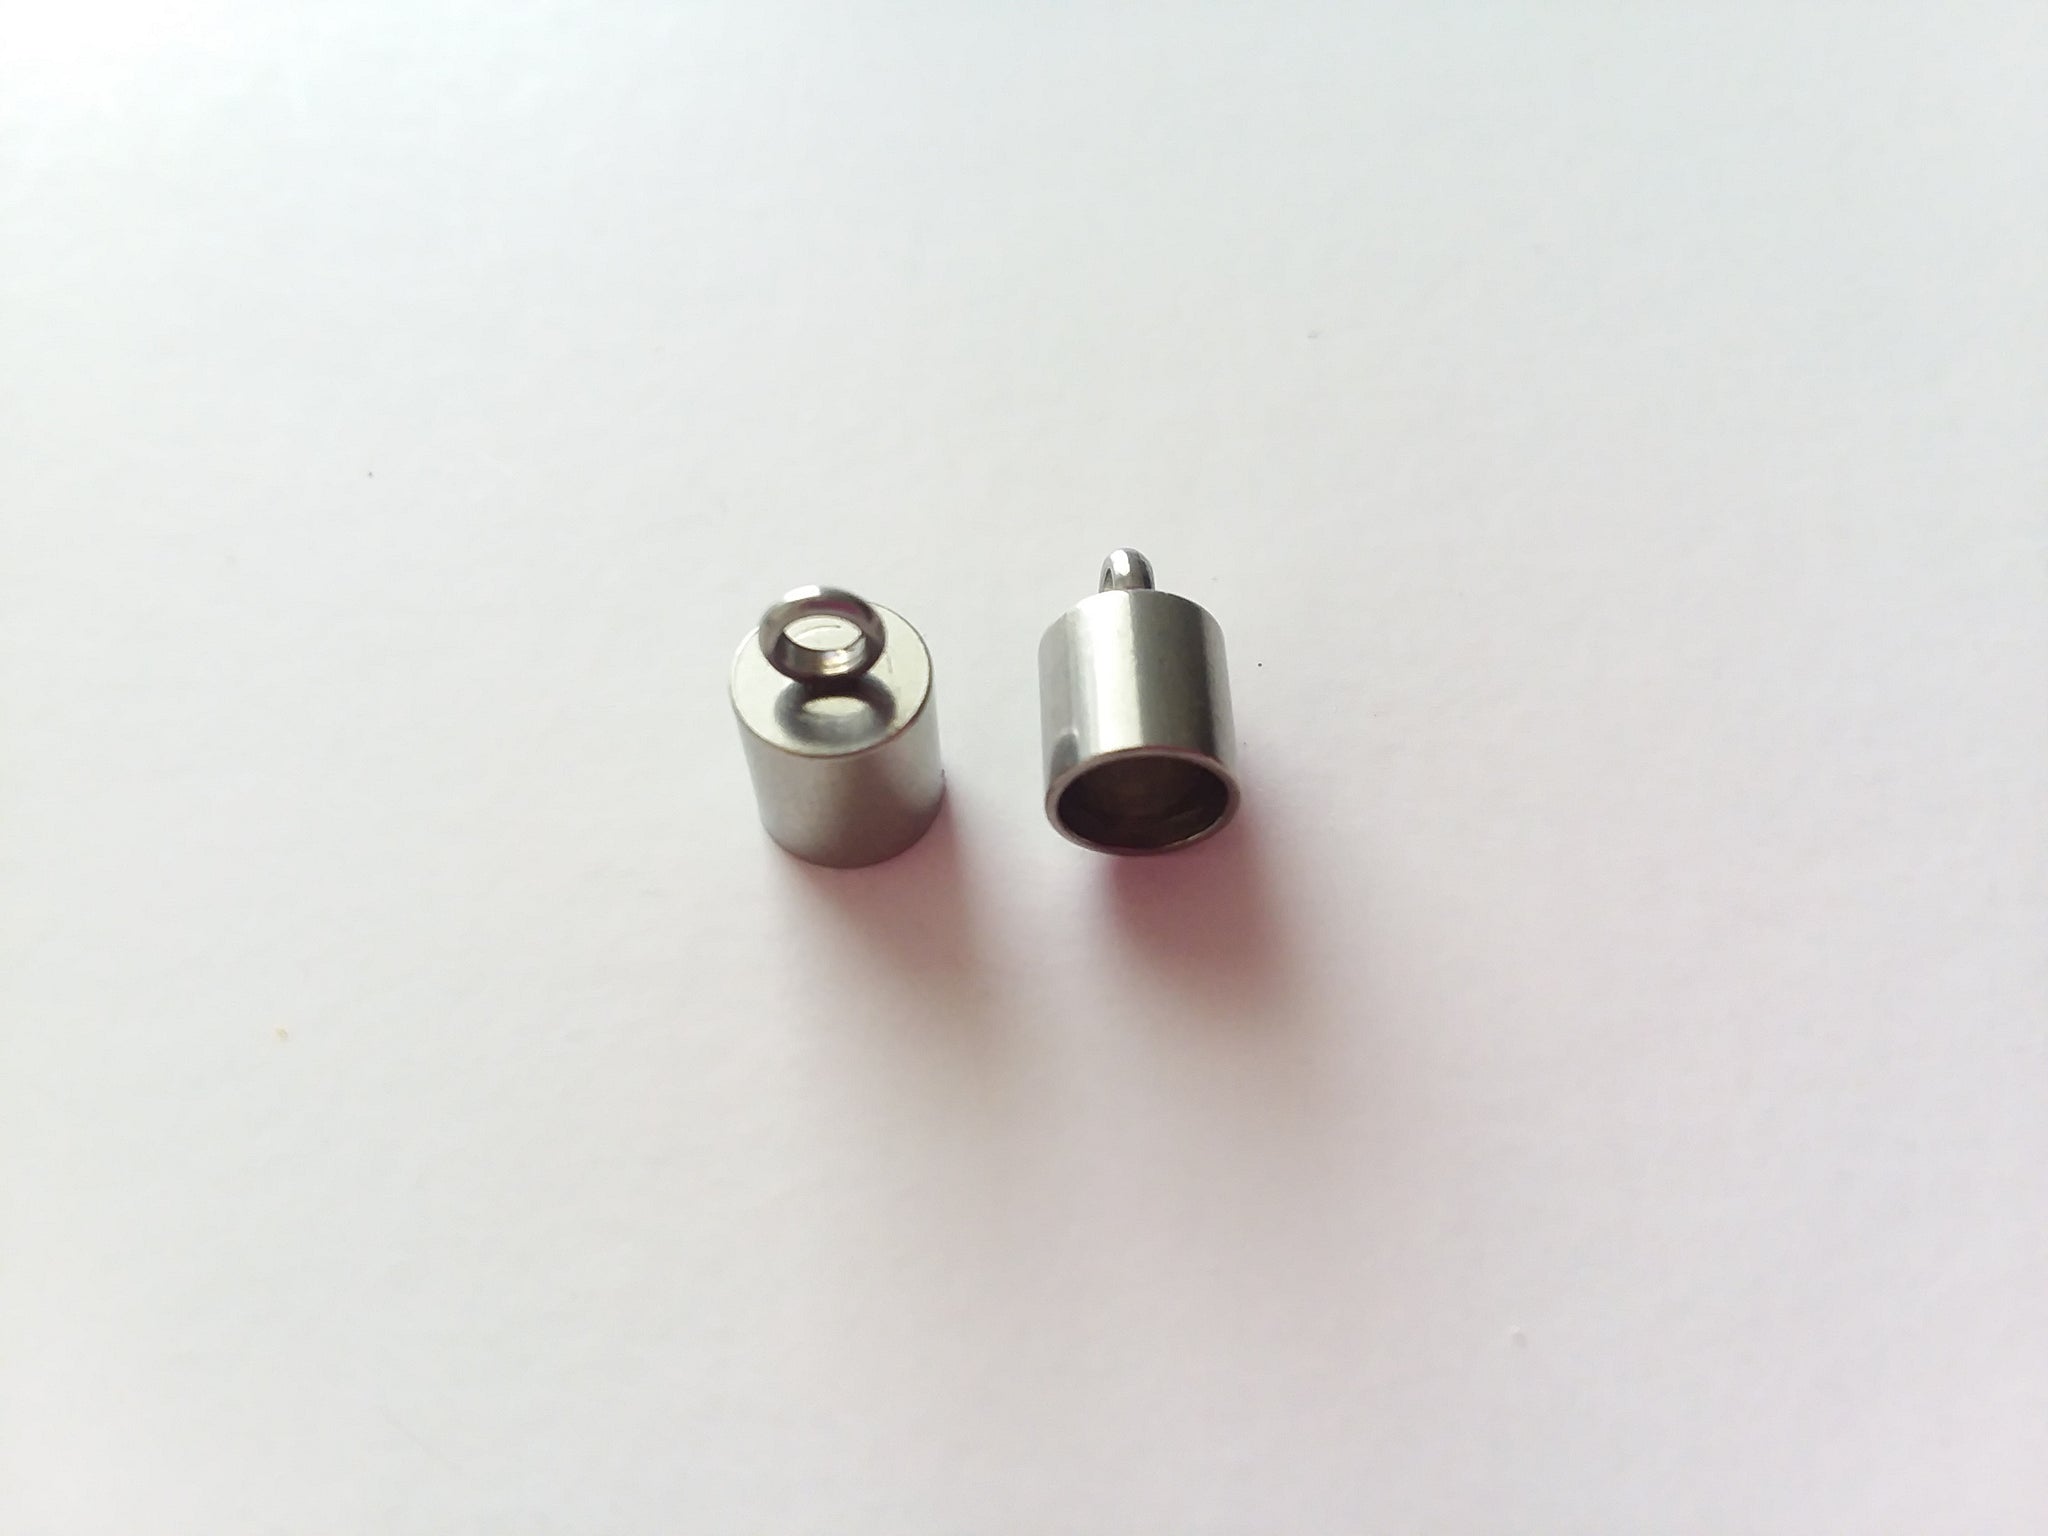 Set of 24 or 100 Silver Stainless Steel Barrel Cord Ends 6mm